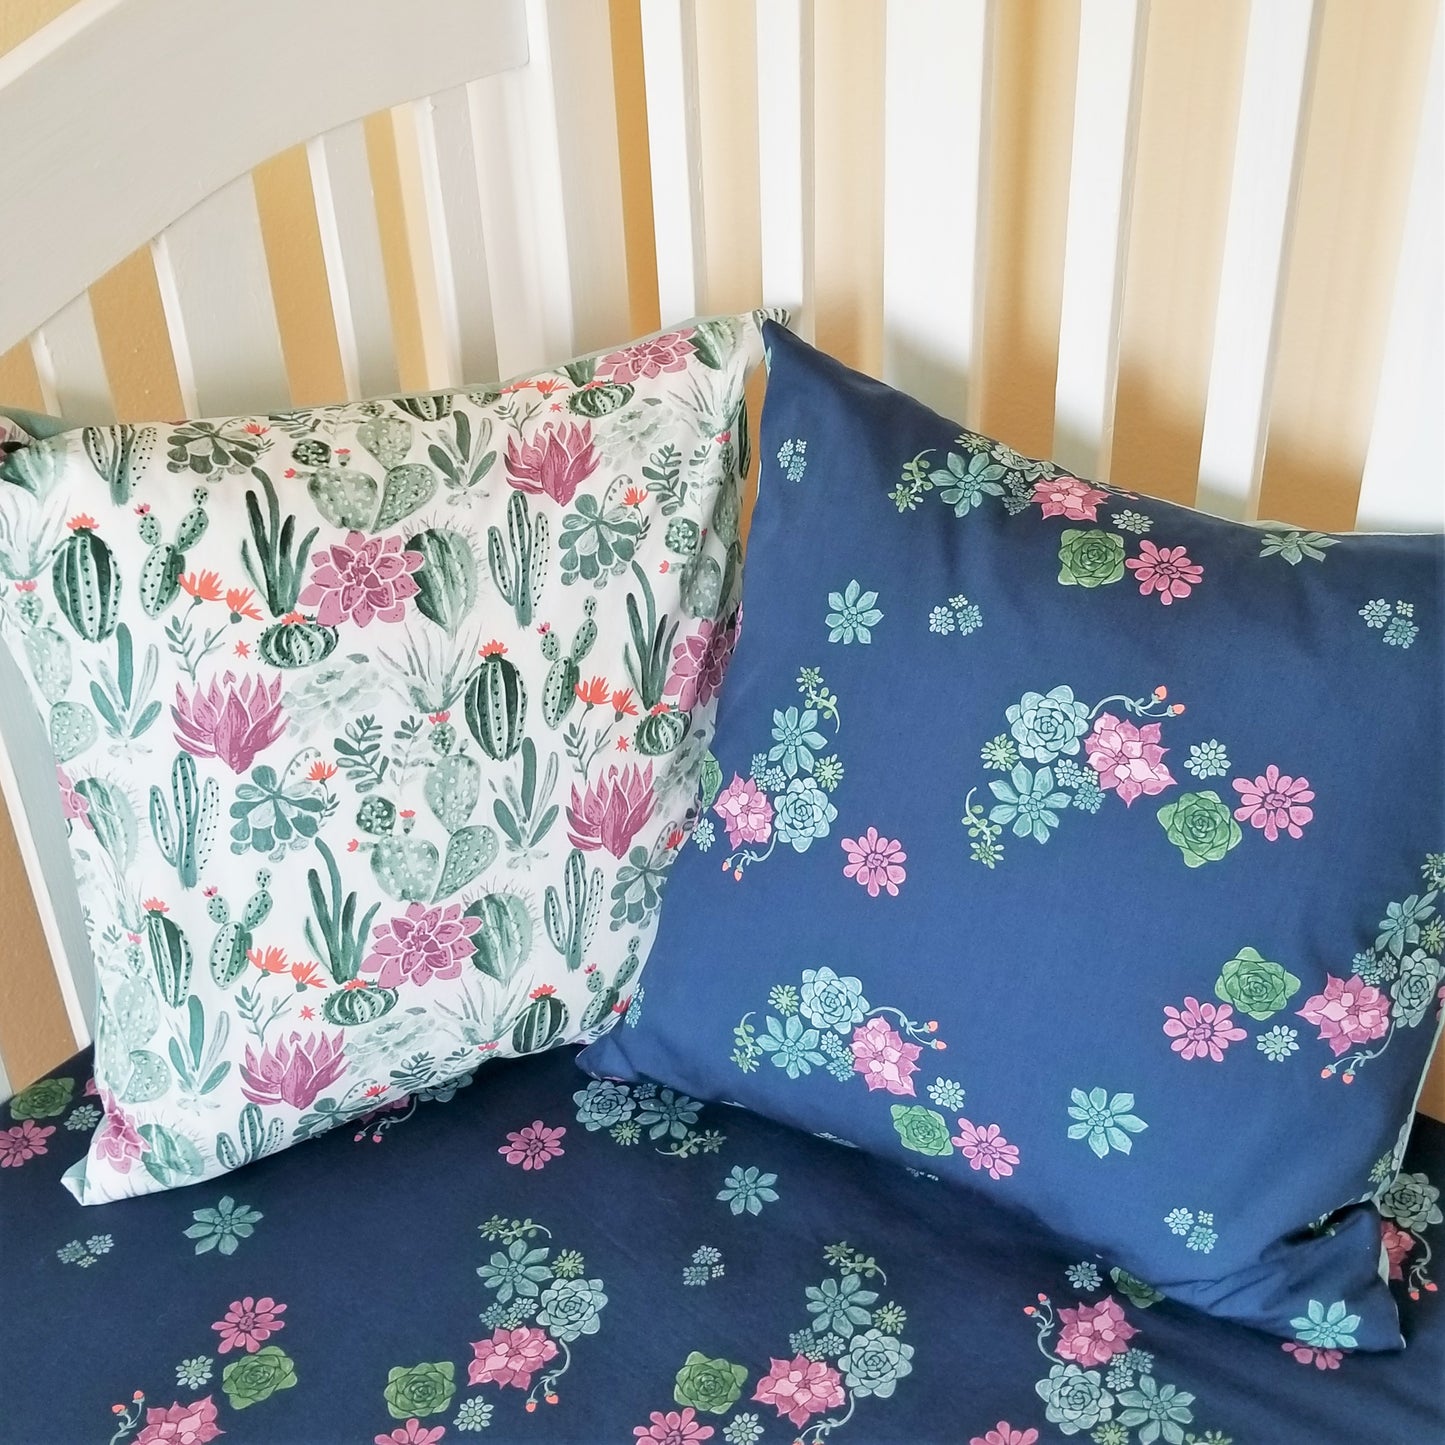 Organic Cotton Accent Pillow Cover in Succulent & Floral Prints